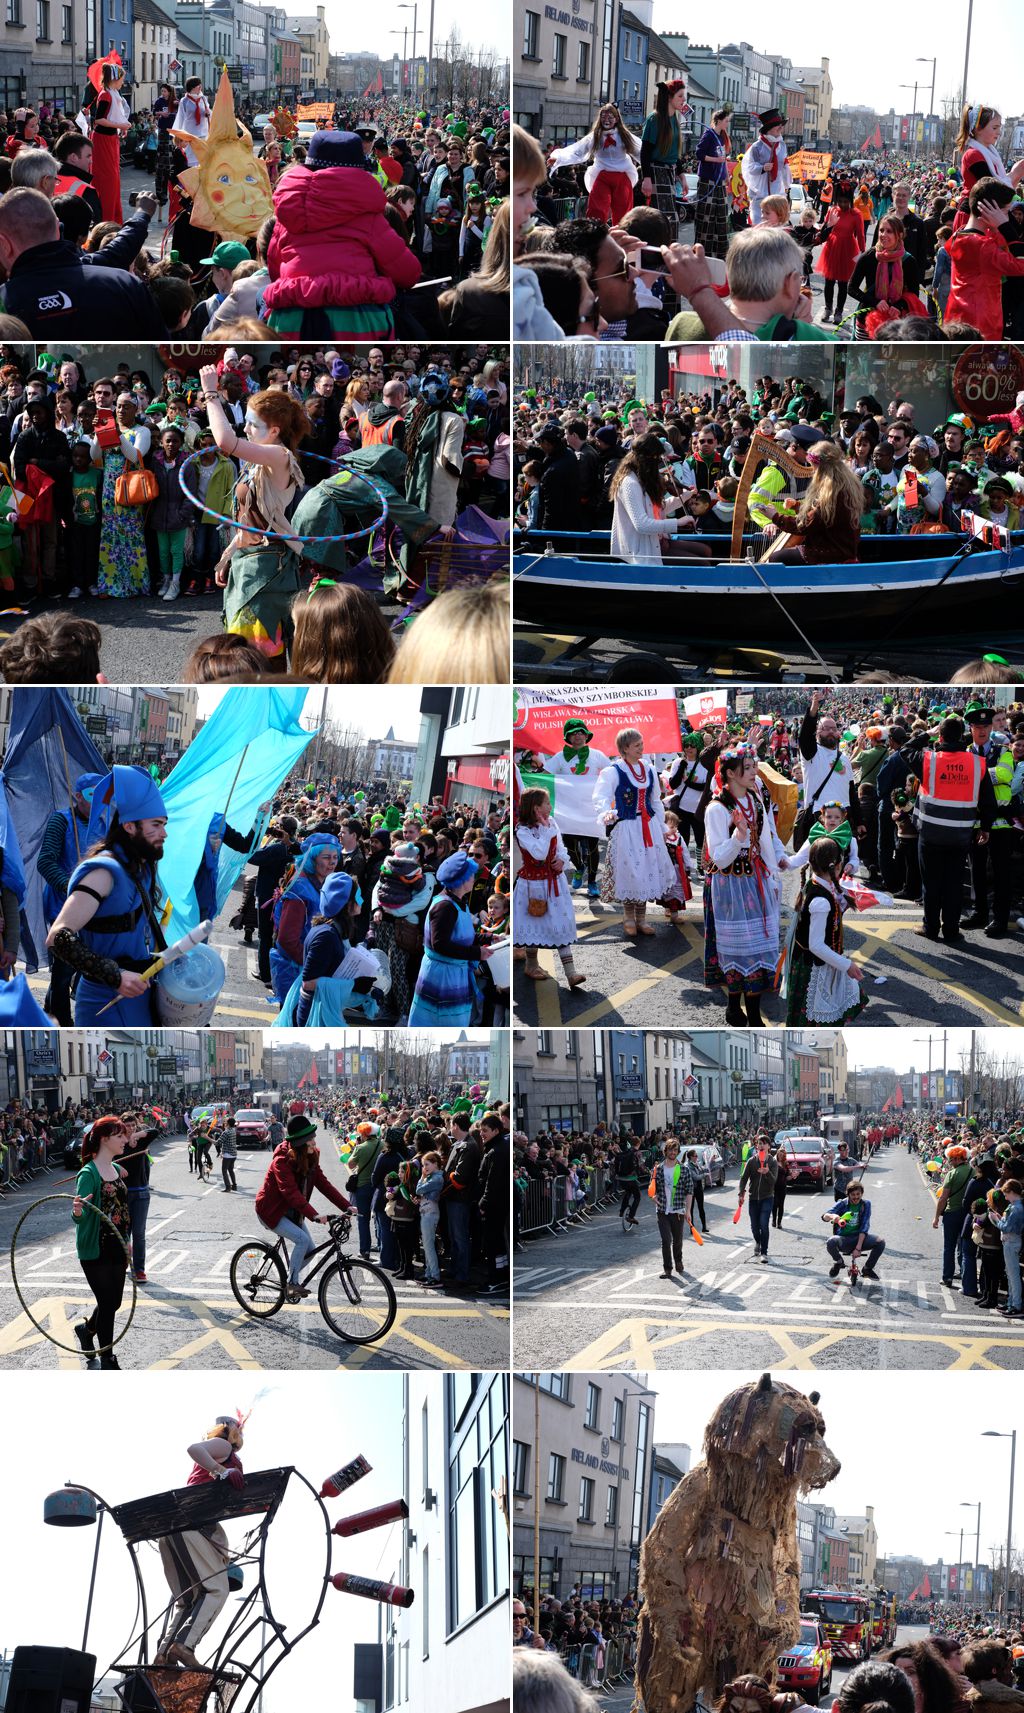 St. Patrick's Day Parade in Galway, Ireland